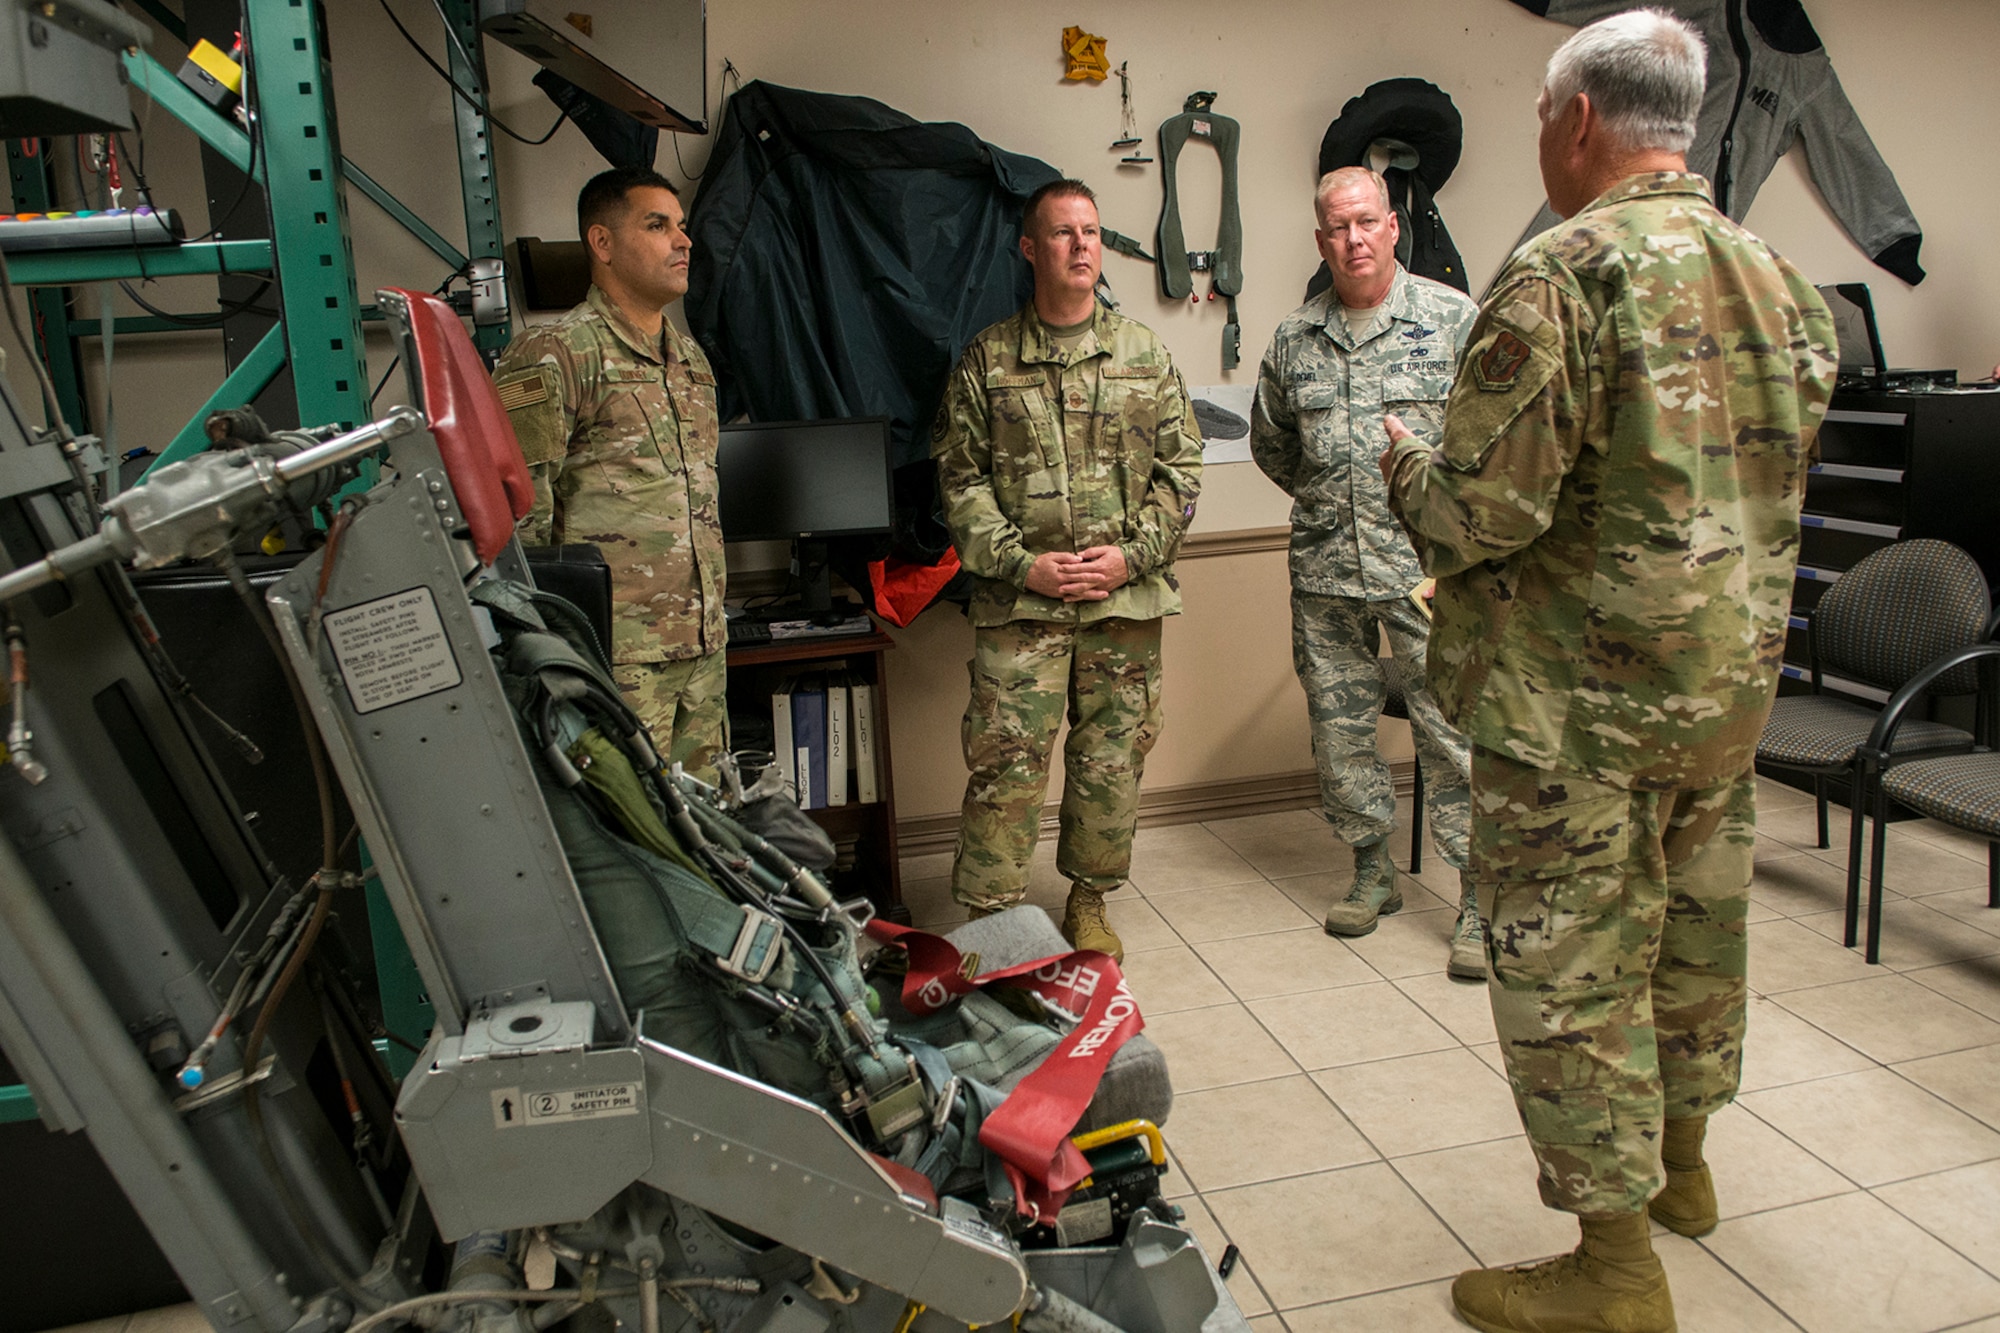 Chief Master Sgt. Charles Hoffman, command chief of Air Force Global Strike Command, visited the 307th Bomb Wing at Barksdale Air Force Base, Louisiana, Sept. 7, 2019. Hoffman spoke with Reserve Citizen Airmen from around the wing and was give the opportunity to familiarize himself with various facets of the wing's mission.